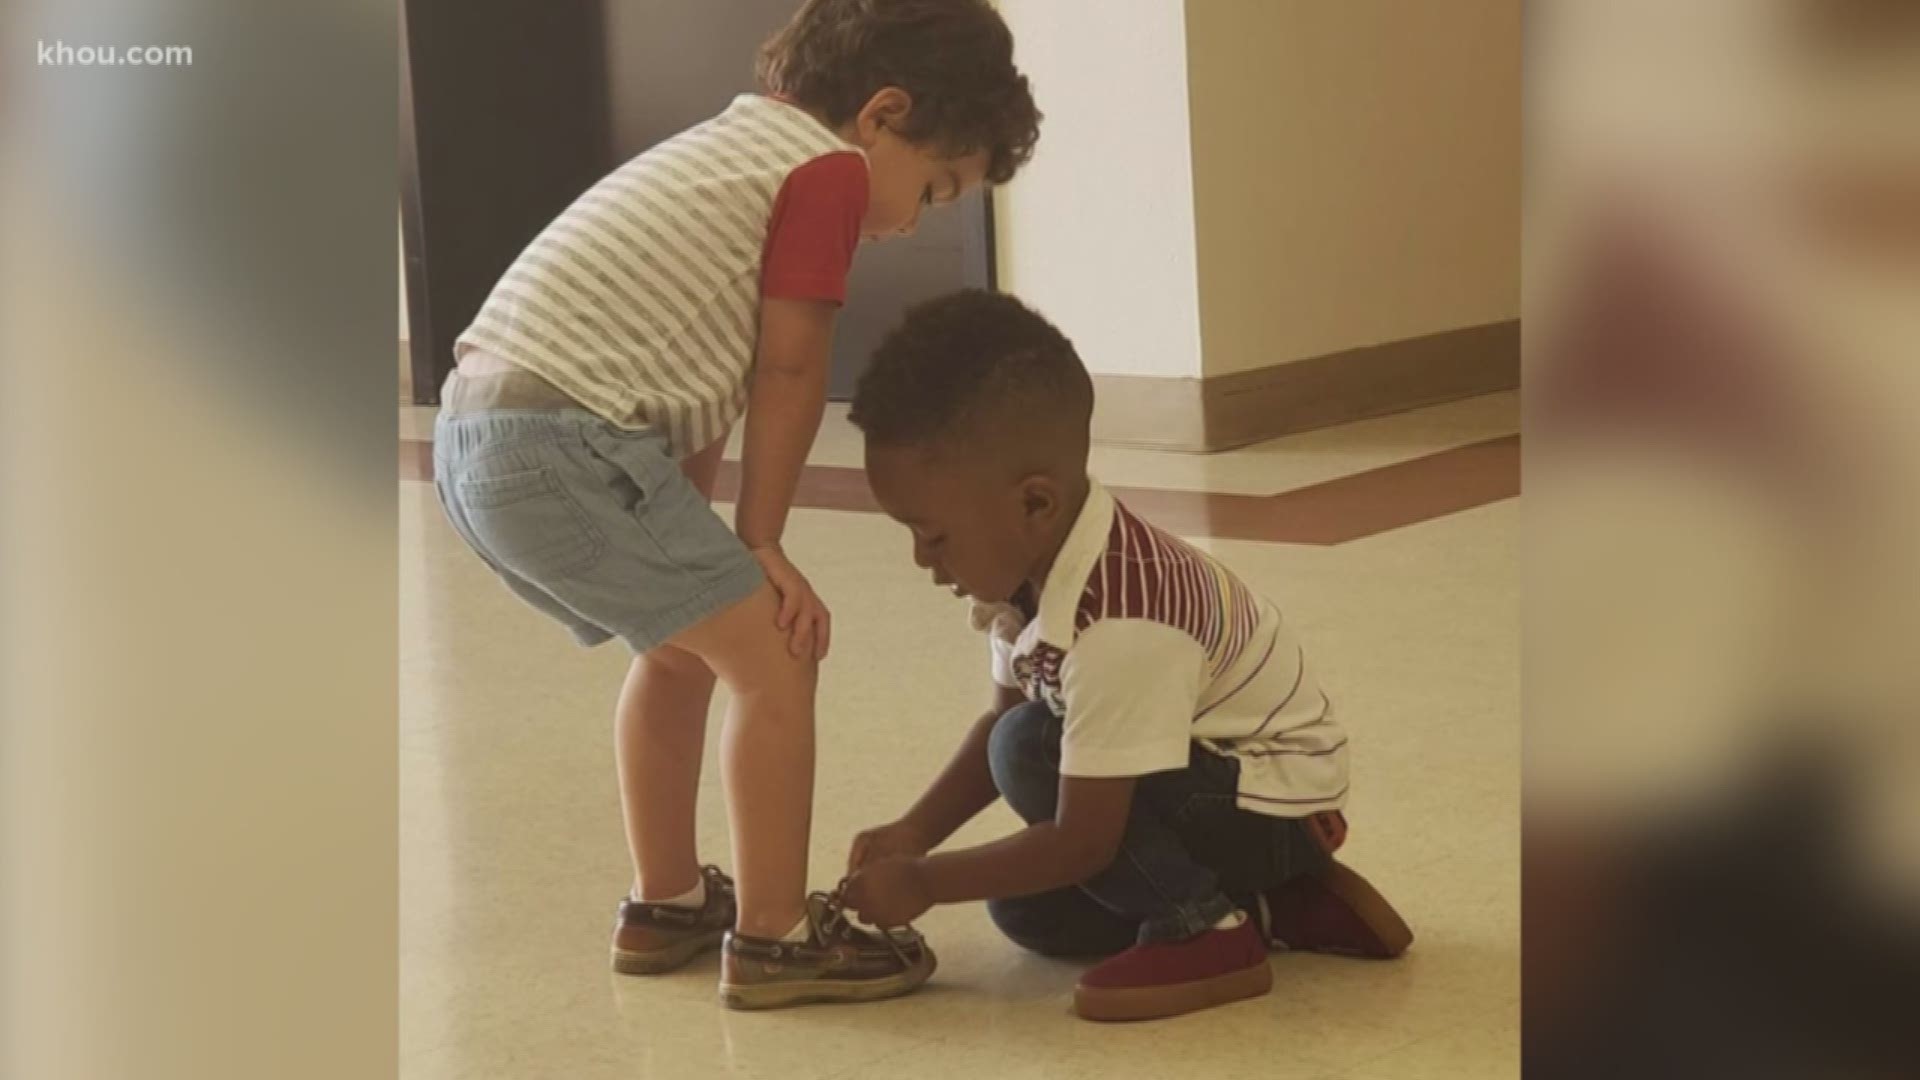 Josiah Owens is only 2 years old but he already knows how to tie his shoes. And other people's too. The toddler helped out another child with his loose laces and the moment was captured on camera.